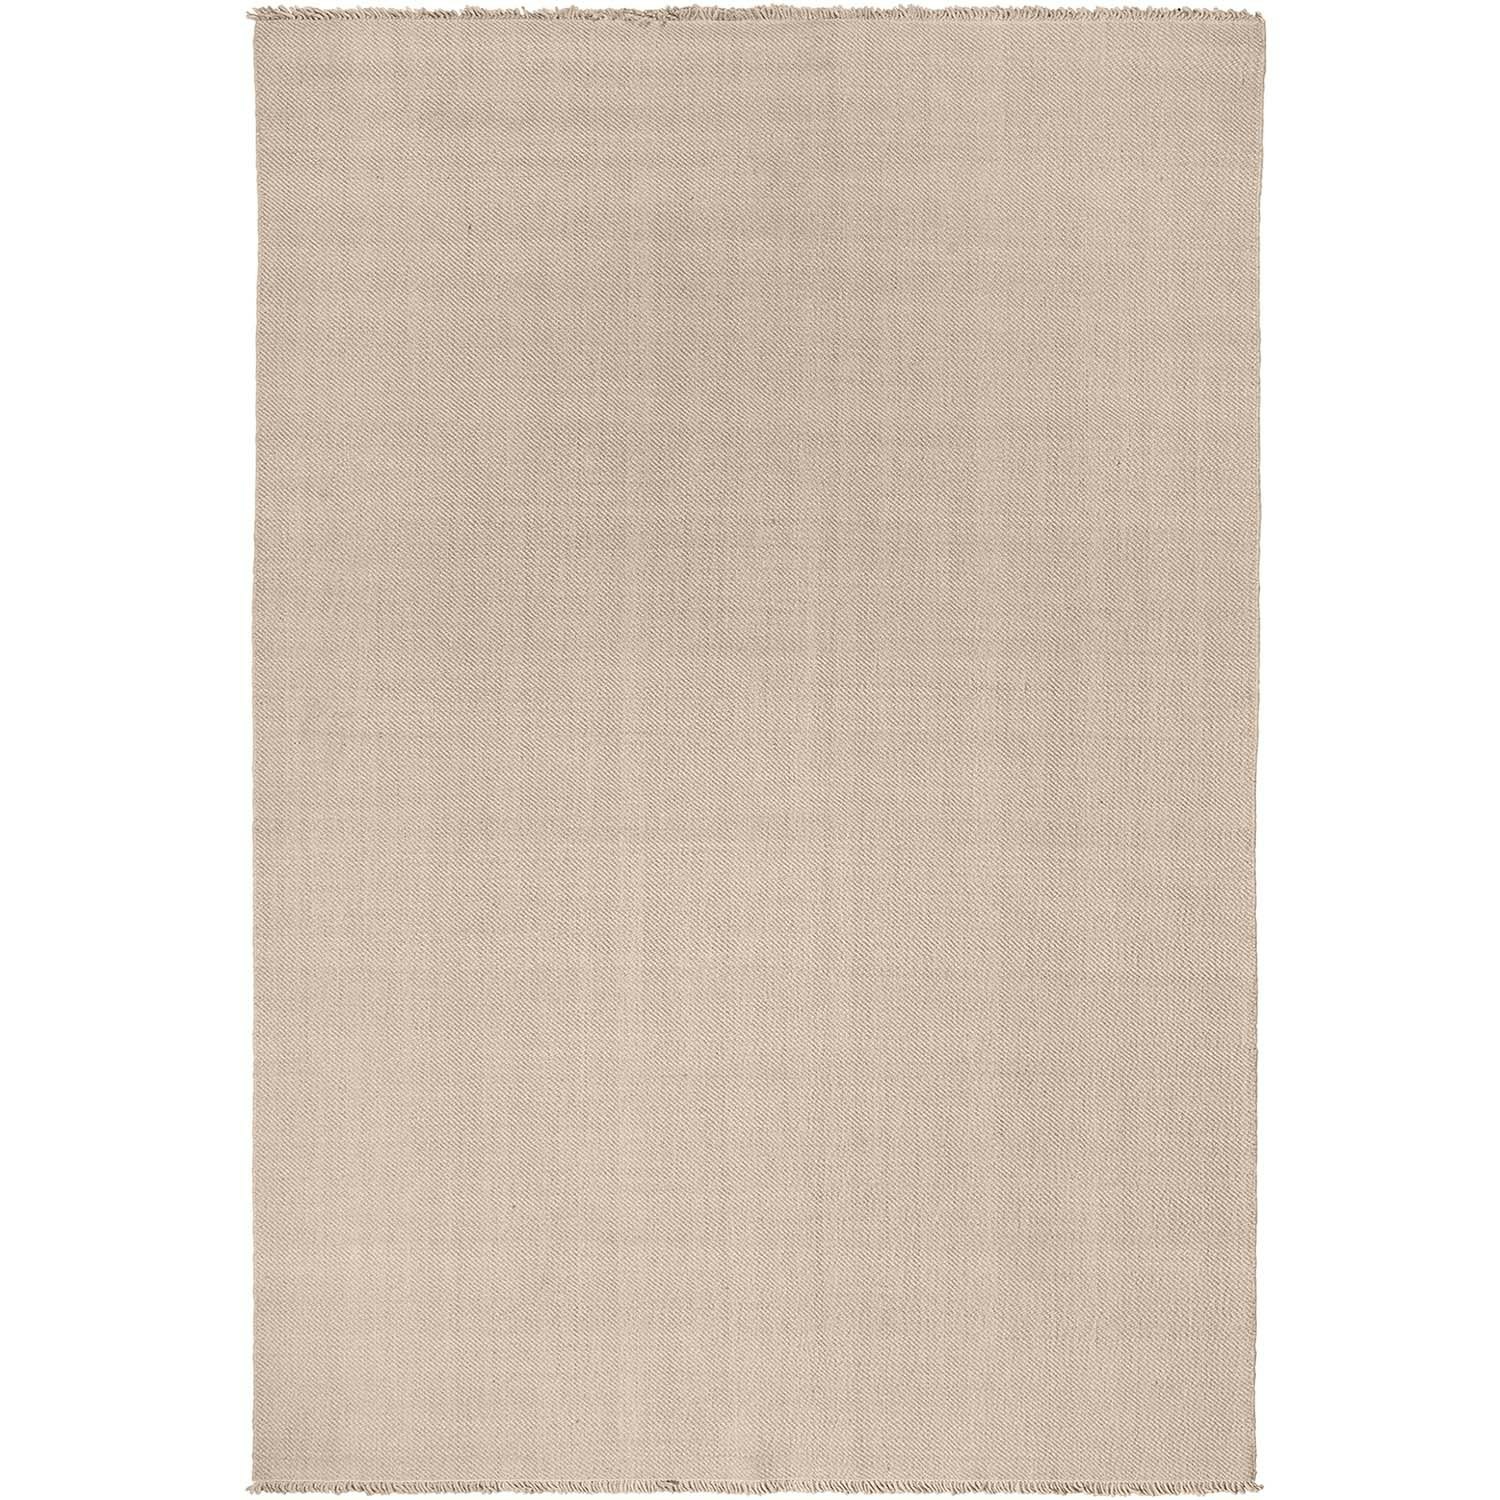 Louise Roe Found 04 Teppe 240x240 cm, Sanded Beige Ull